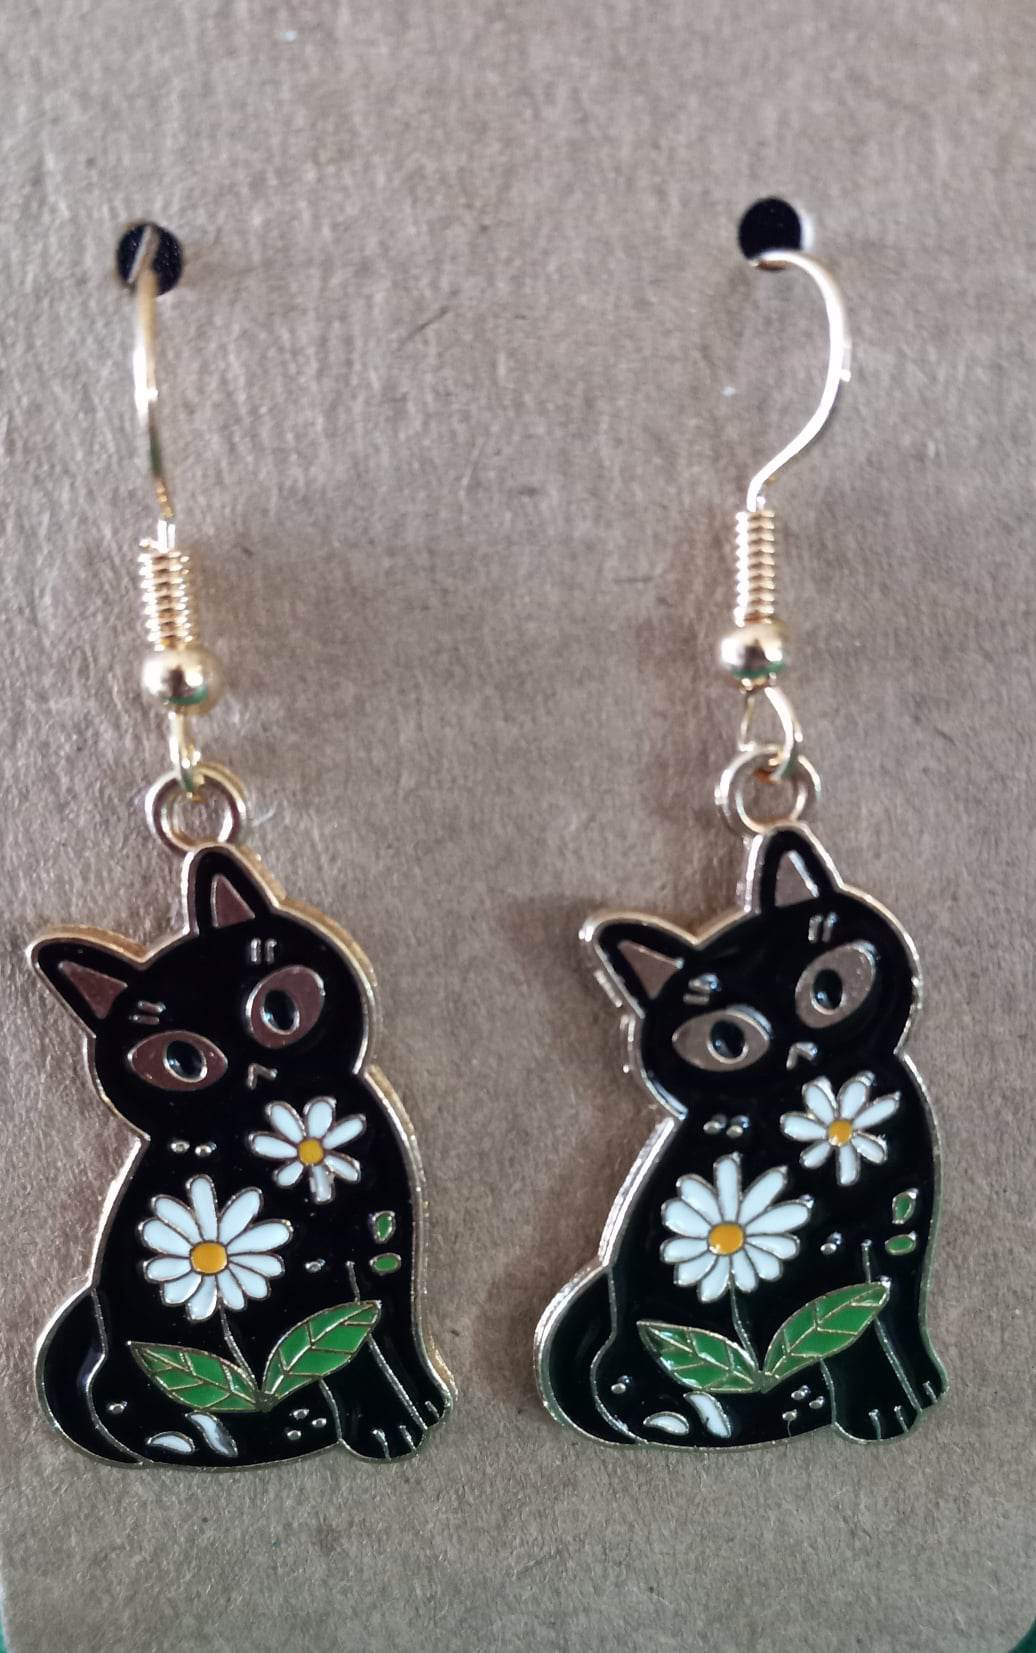 Daisy Black Cat Earrings - Click Image to Close